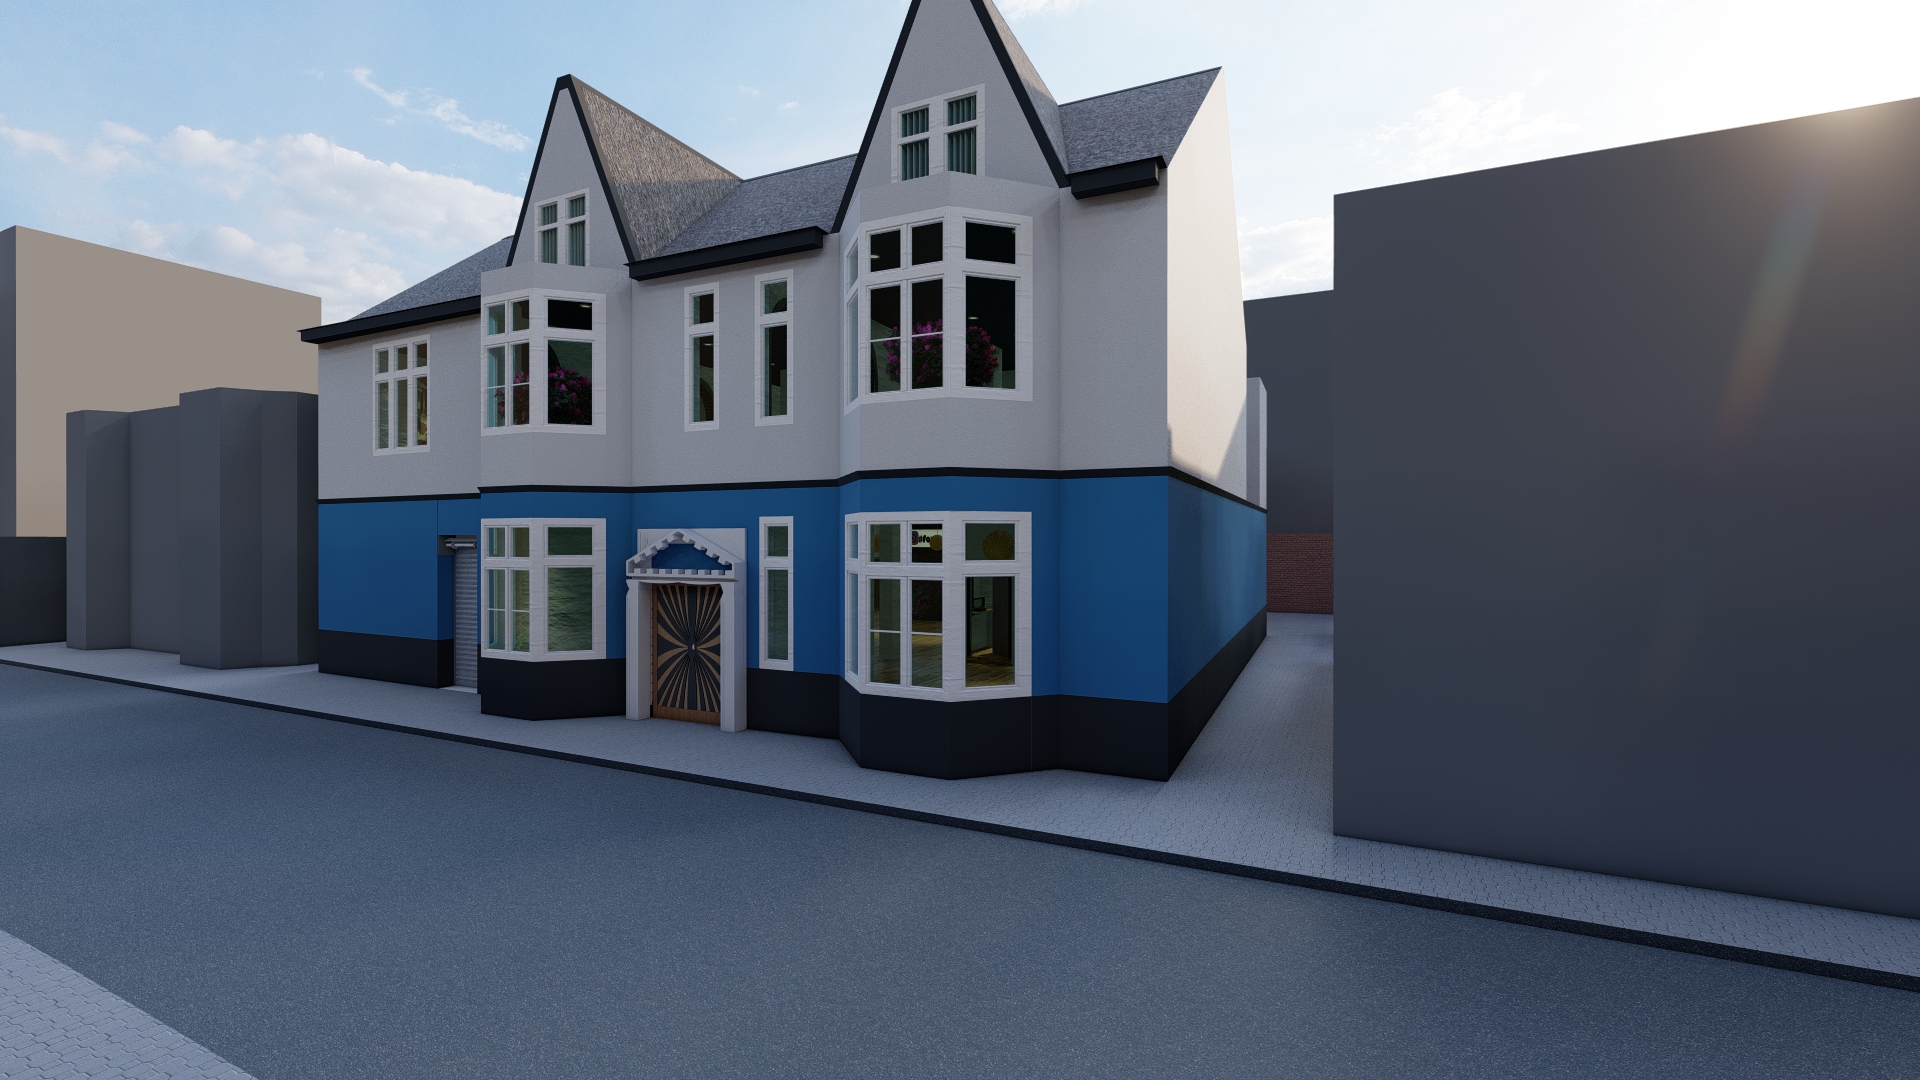 An artist's impression of the transformed The Fox & Goose on Cable Street in Southport